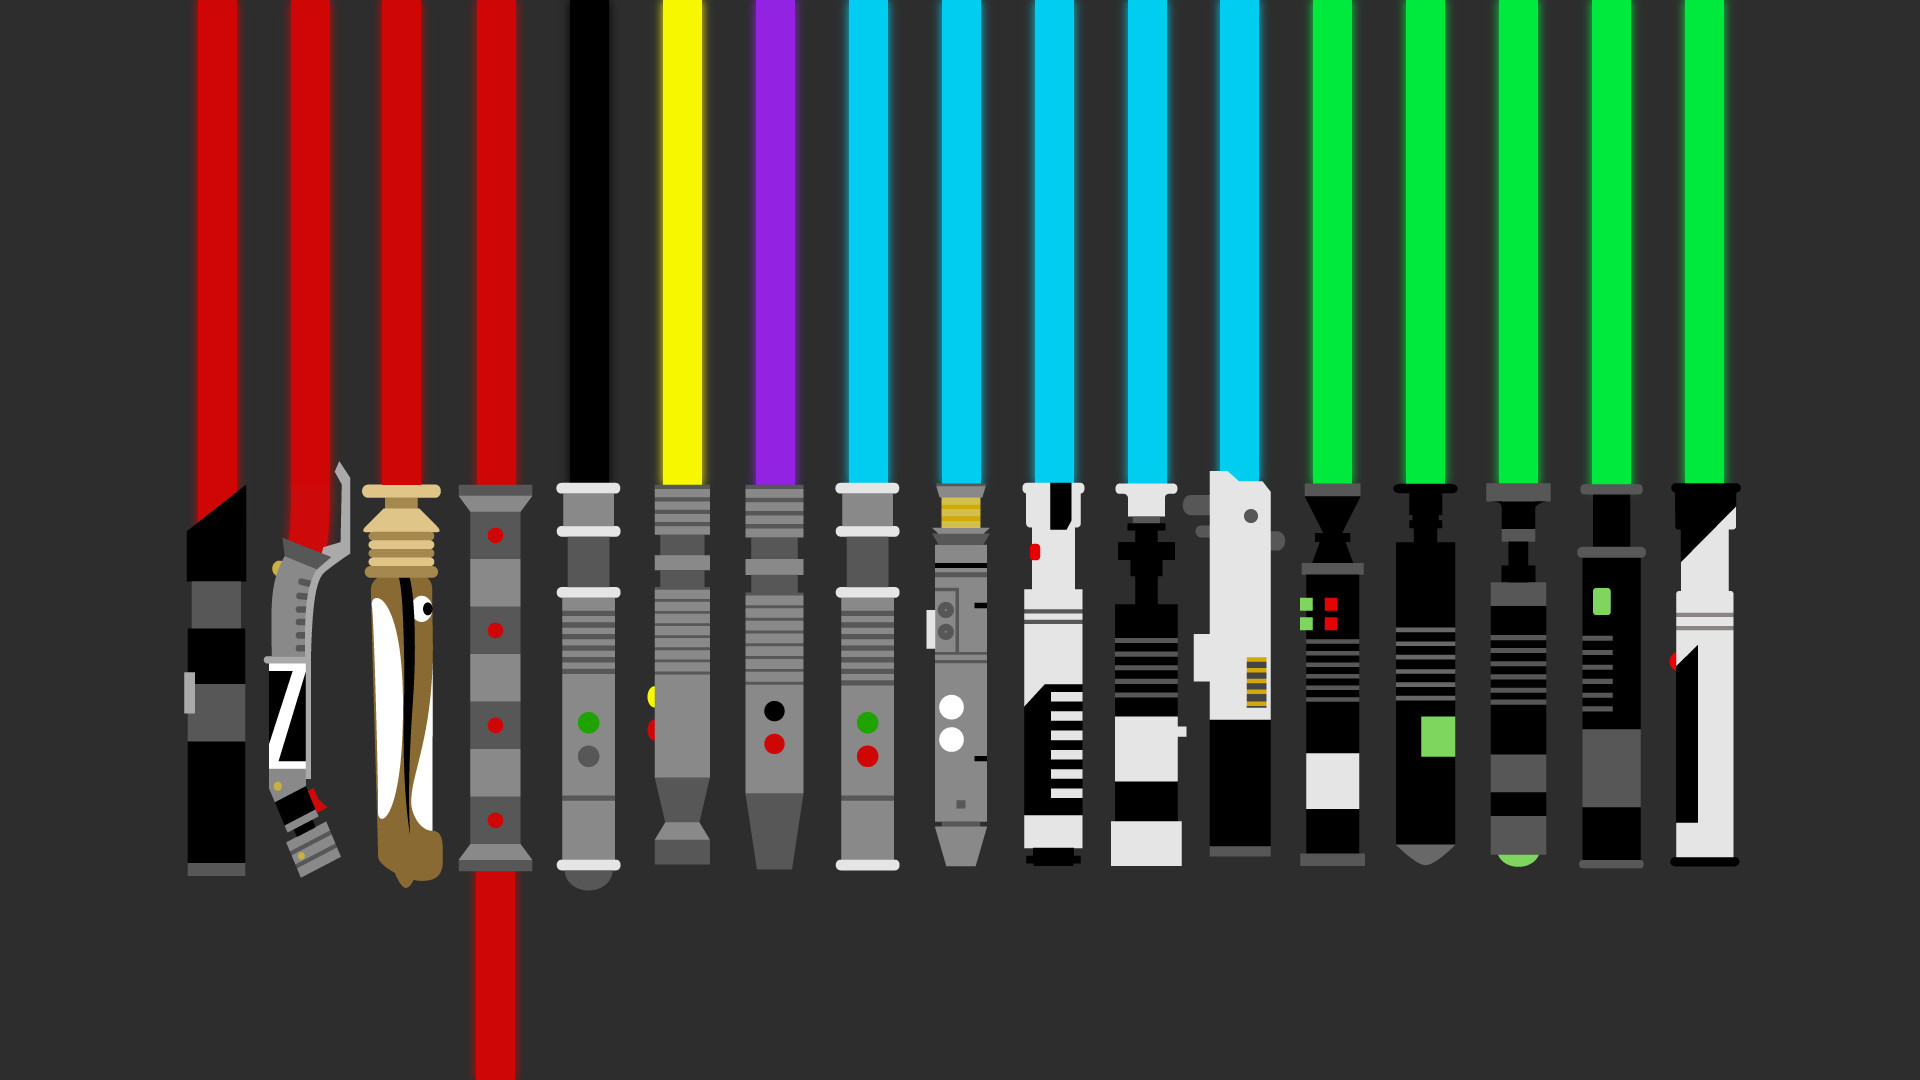 1920x1080 Vectored this lightsaber wallpaper - more info and resolutions in the  description (x-post